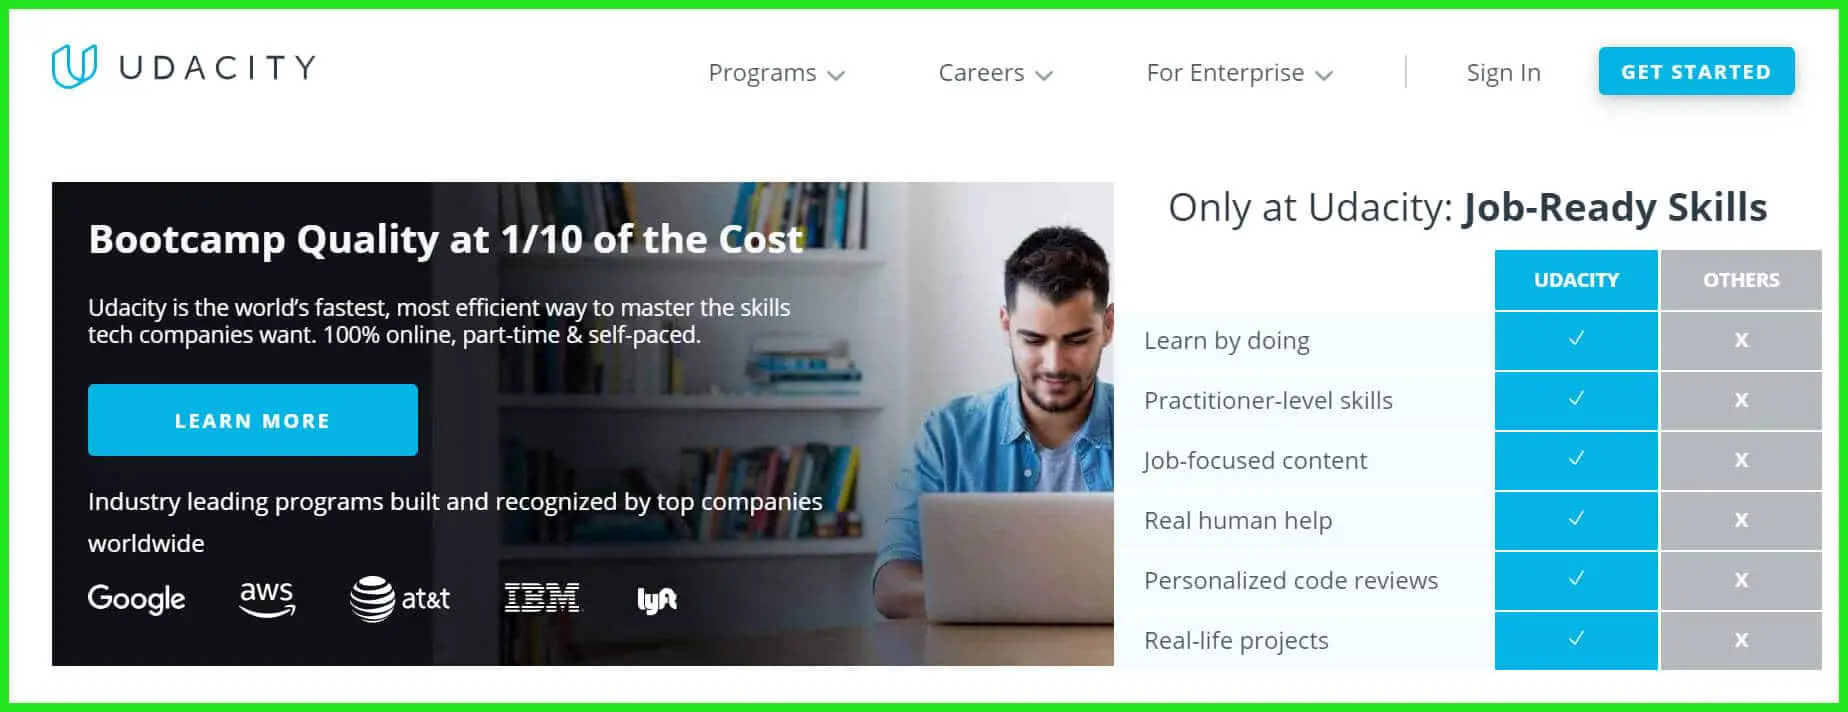 9 Of The Best eLearning Websites To Boost Your Skills